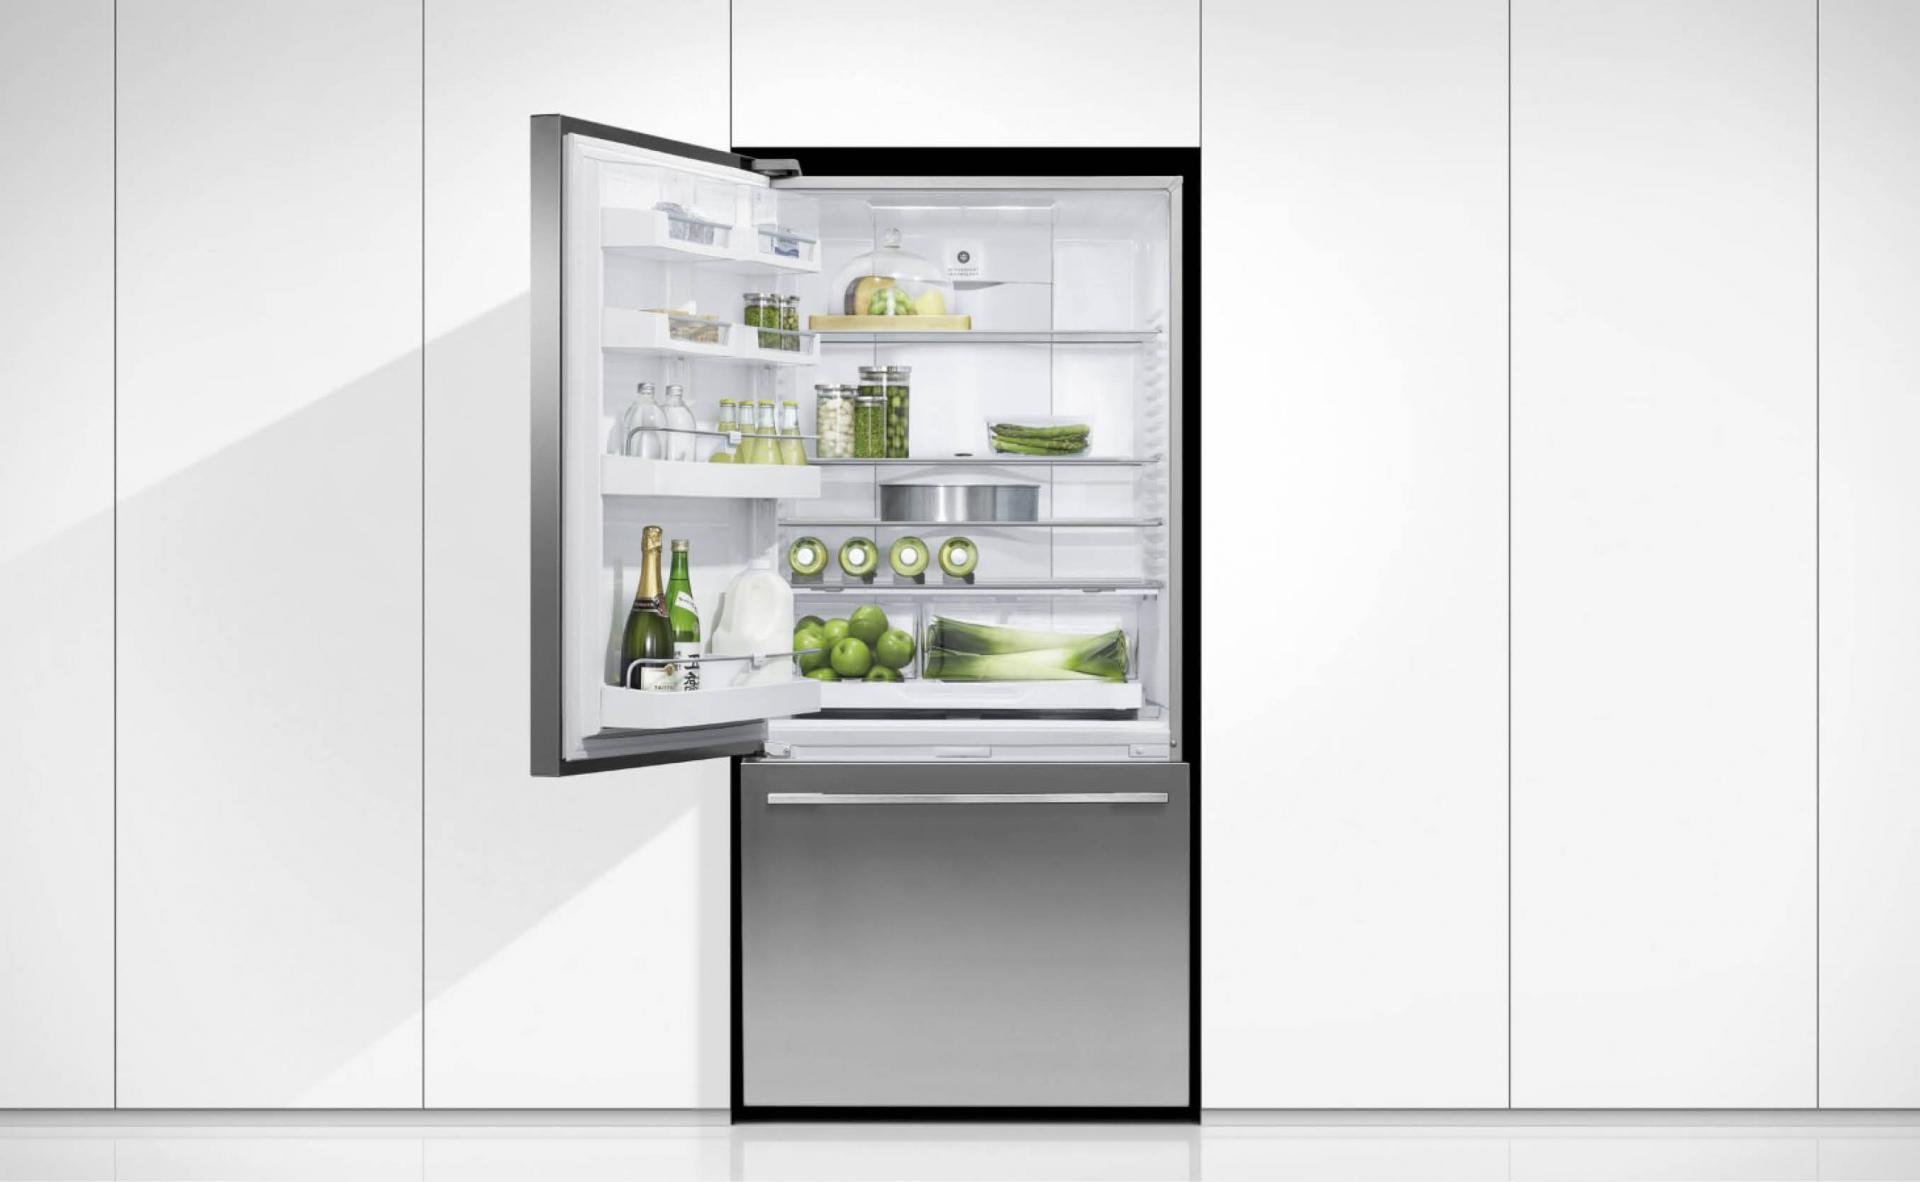 Human Centred Design: Haven Design x Fisher & Paykel